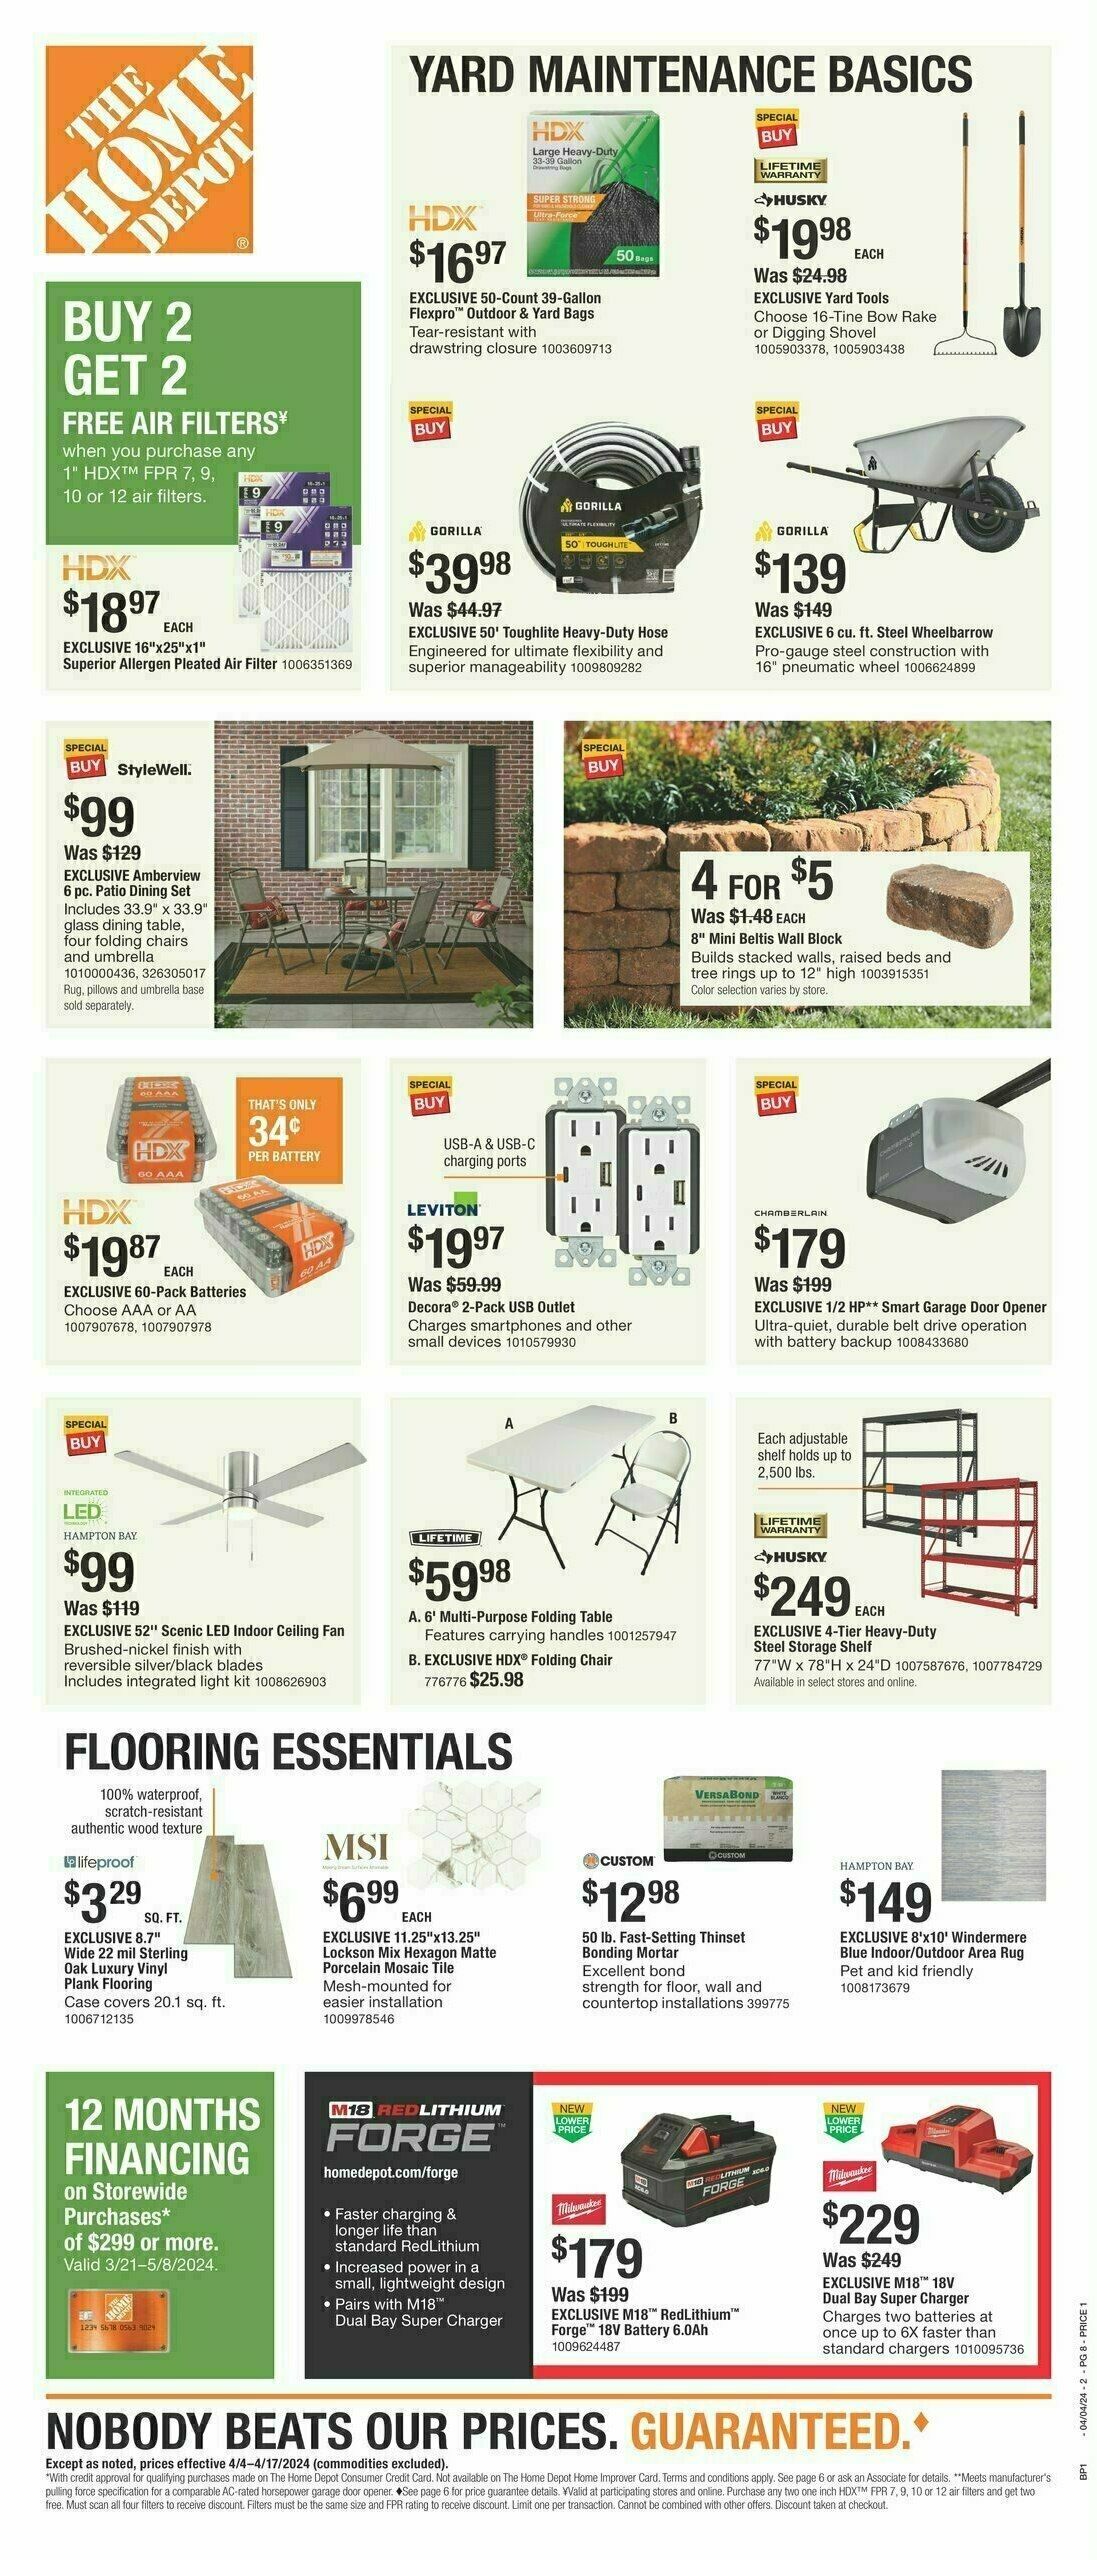 The Home Depot Early Spring Black Friday Weekly Ad from April 4